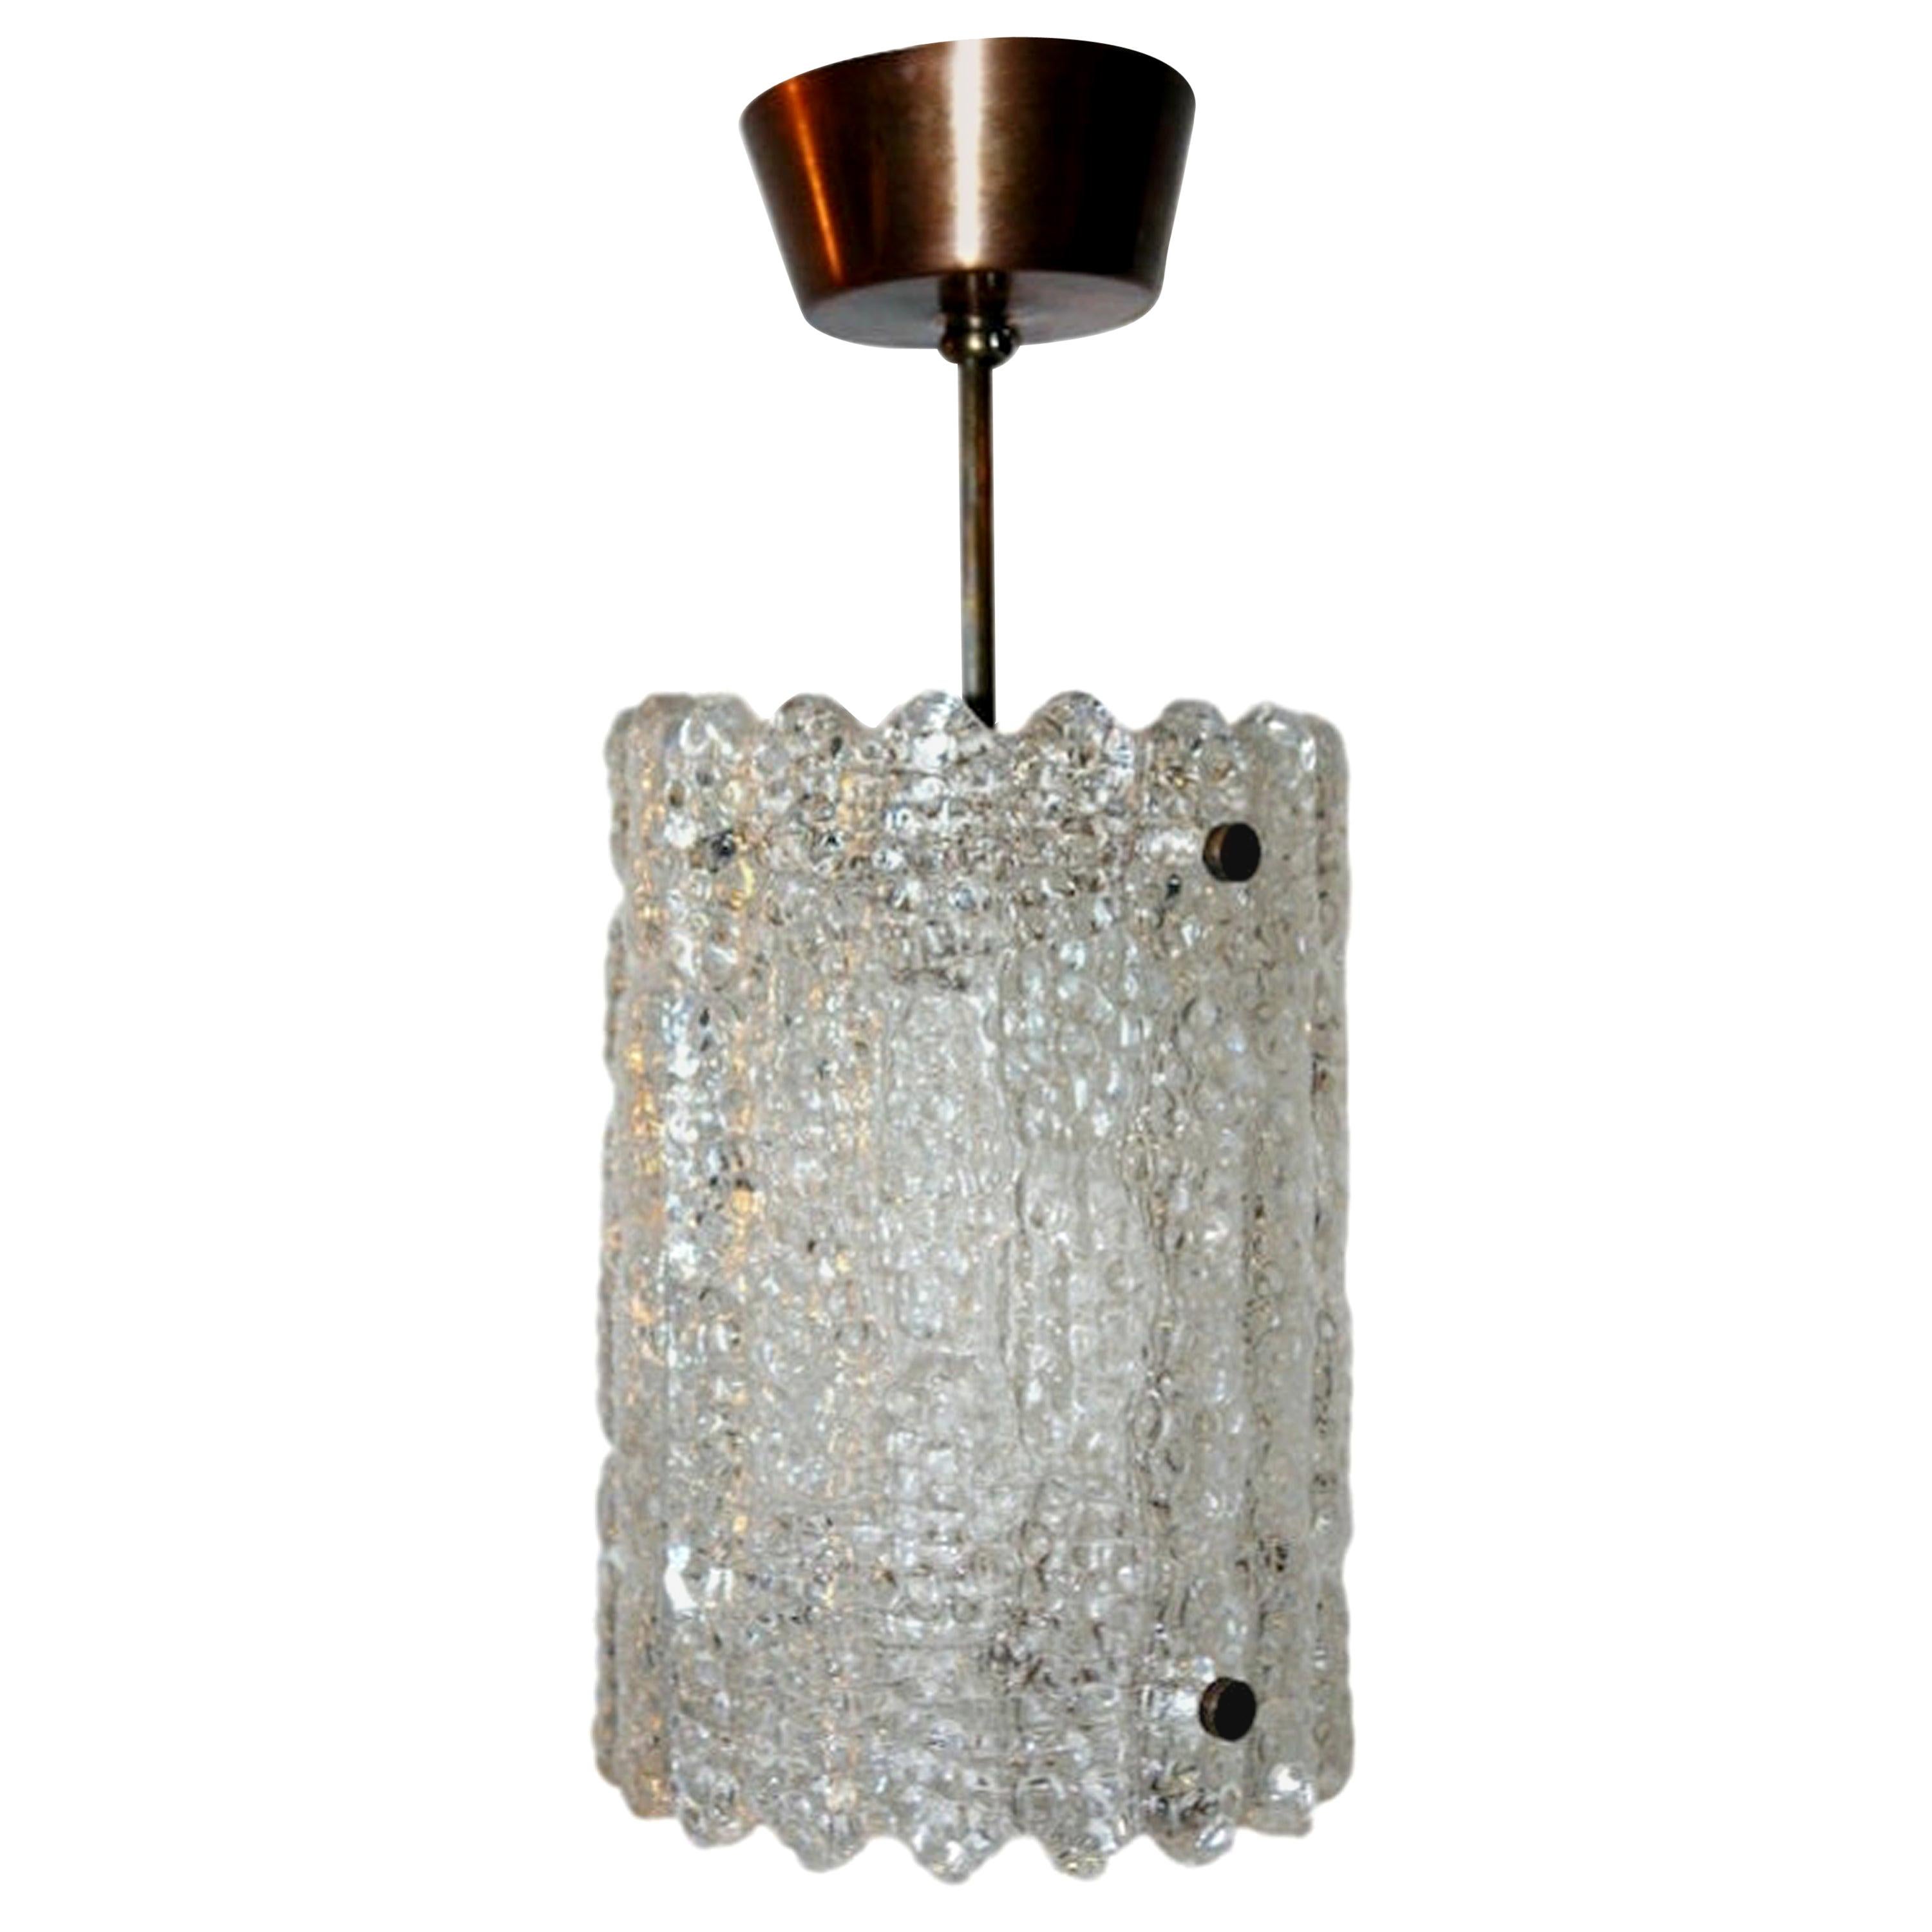 Set of Swedish Glass Fixtures. Sold individually.